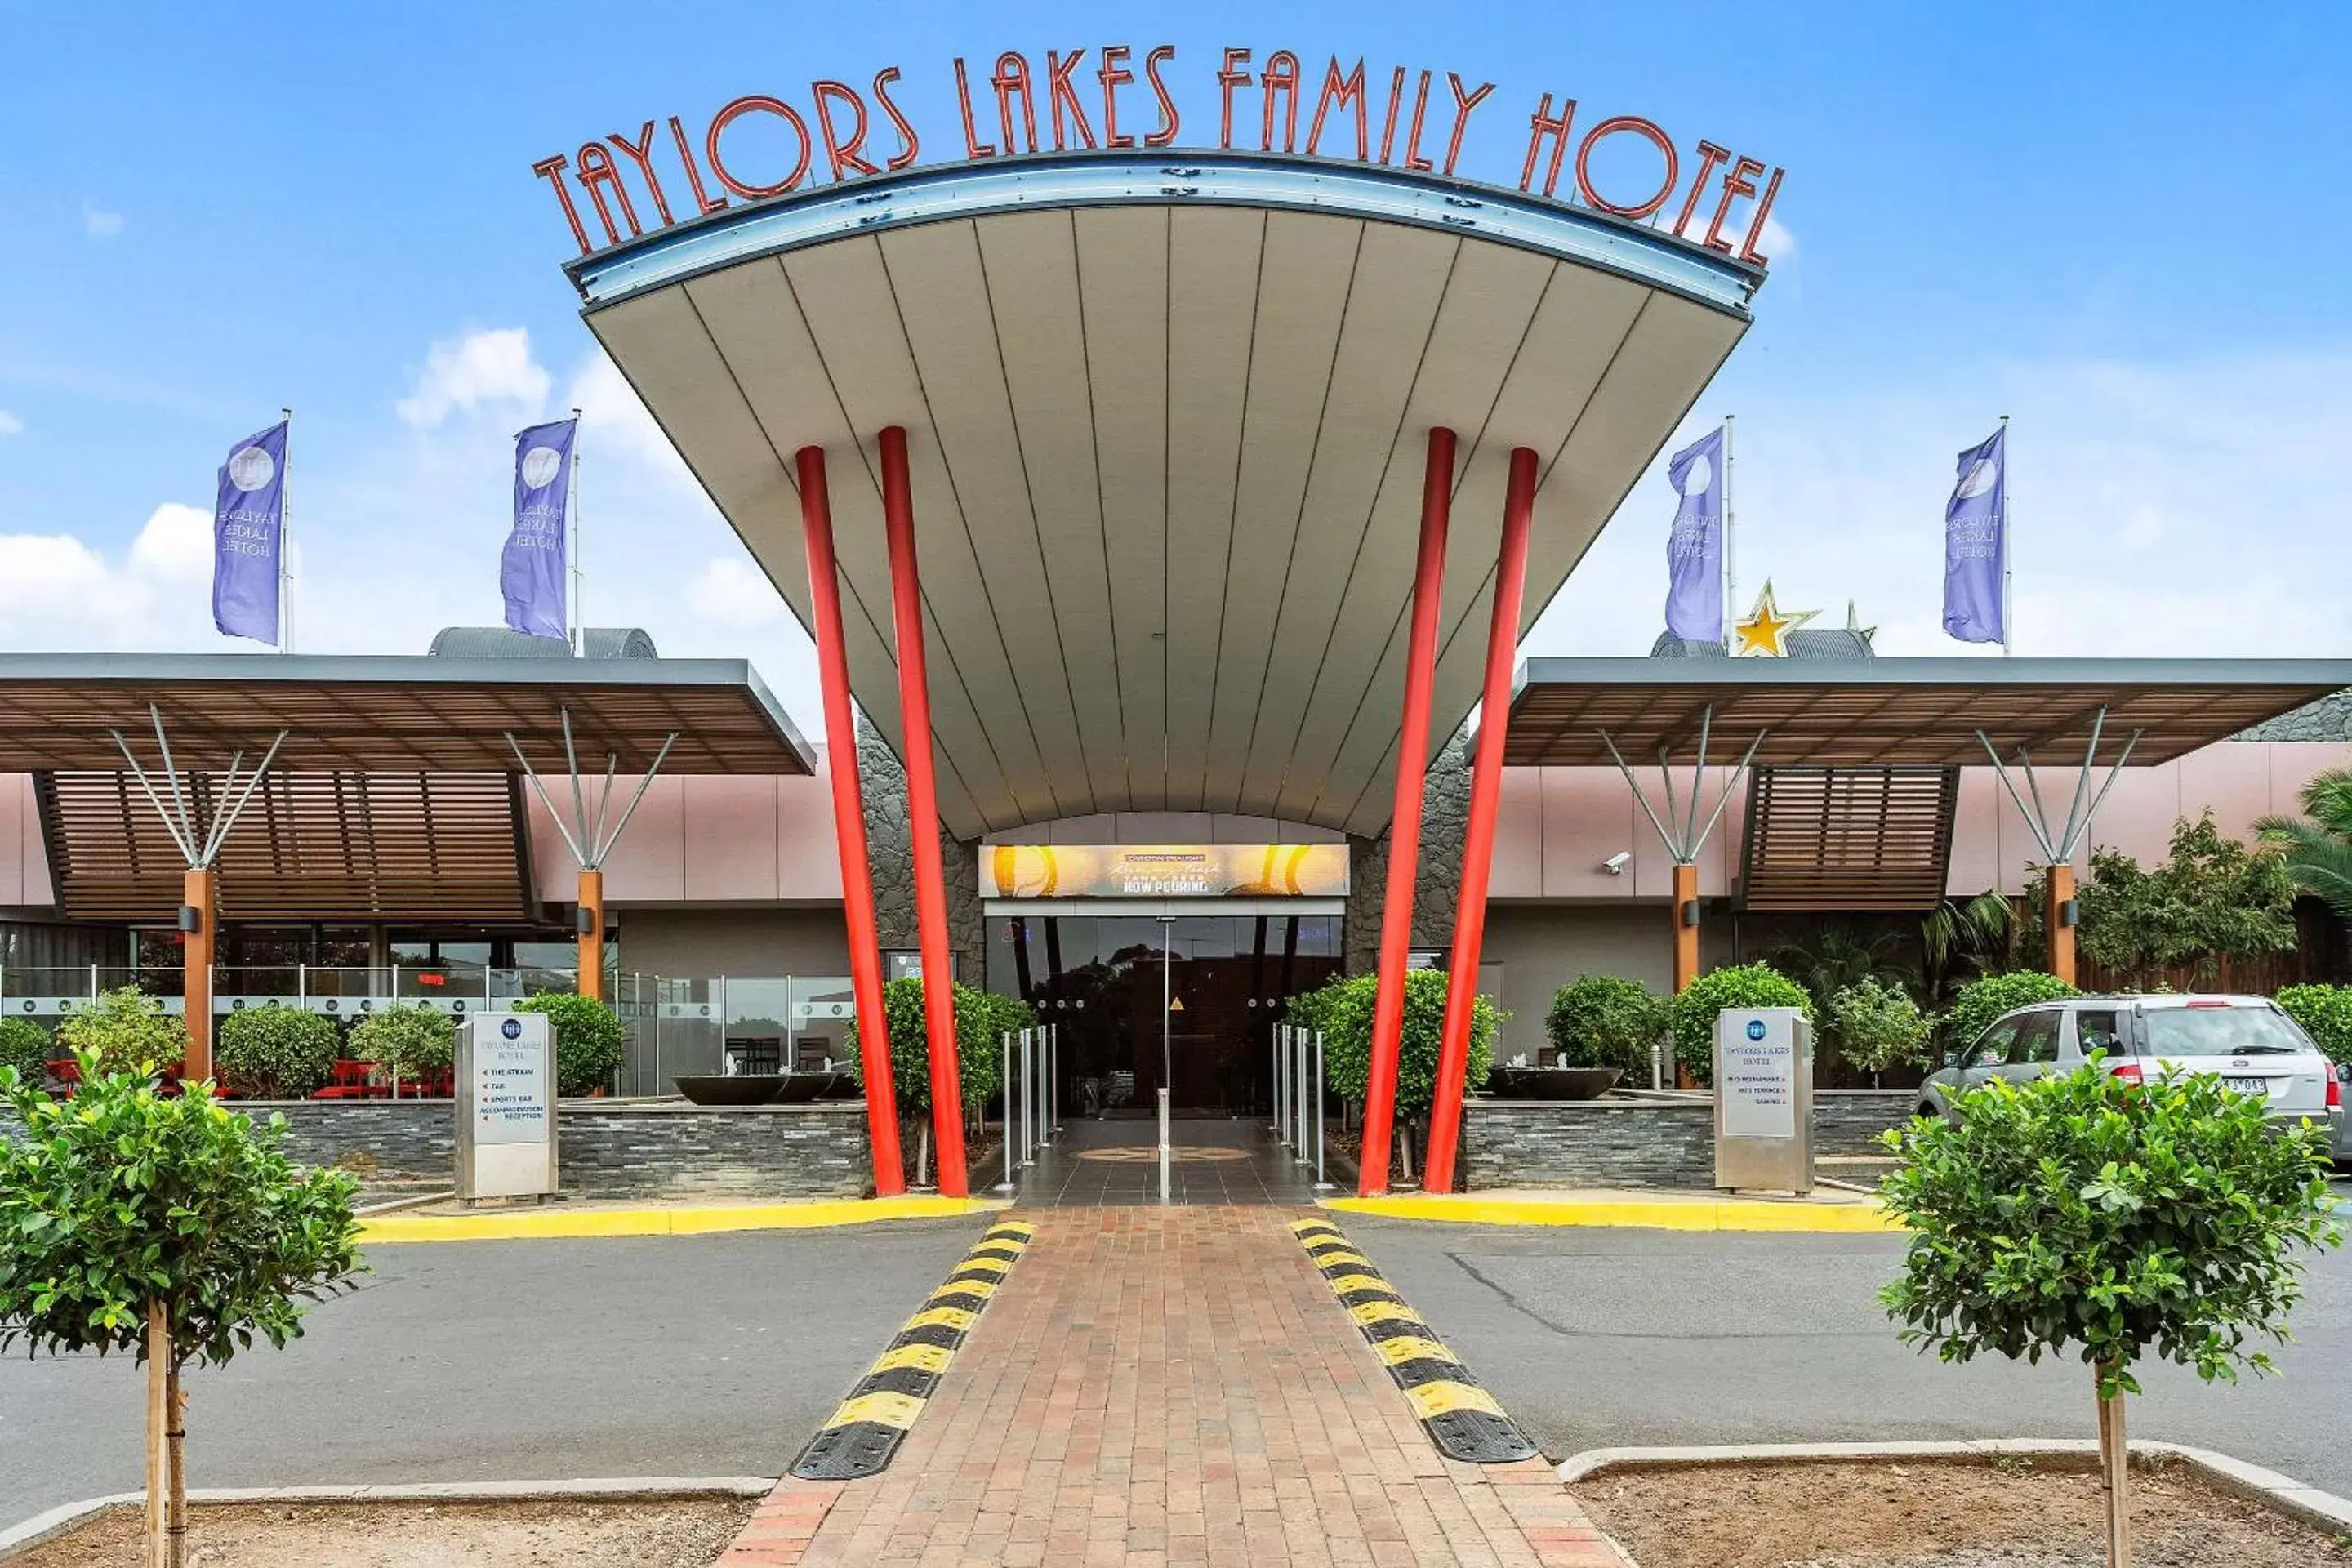 Property Building in Quality Hotel Taylors Lakes